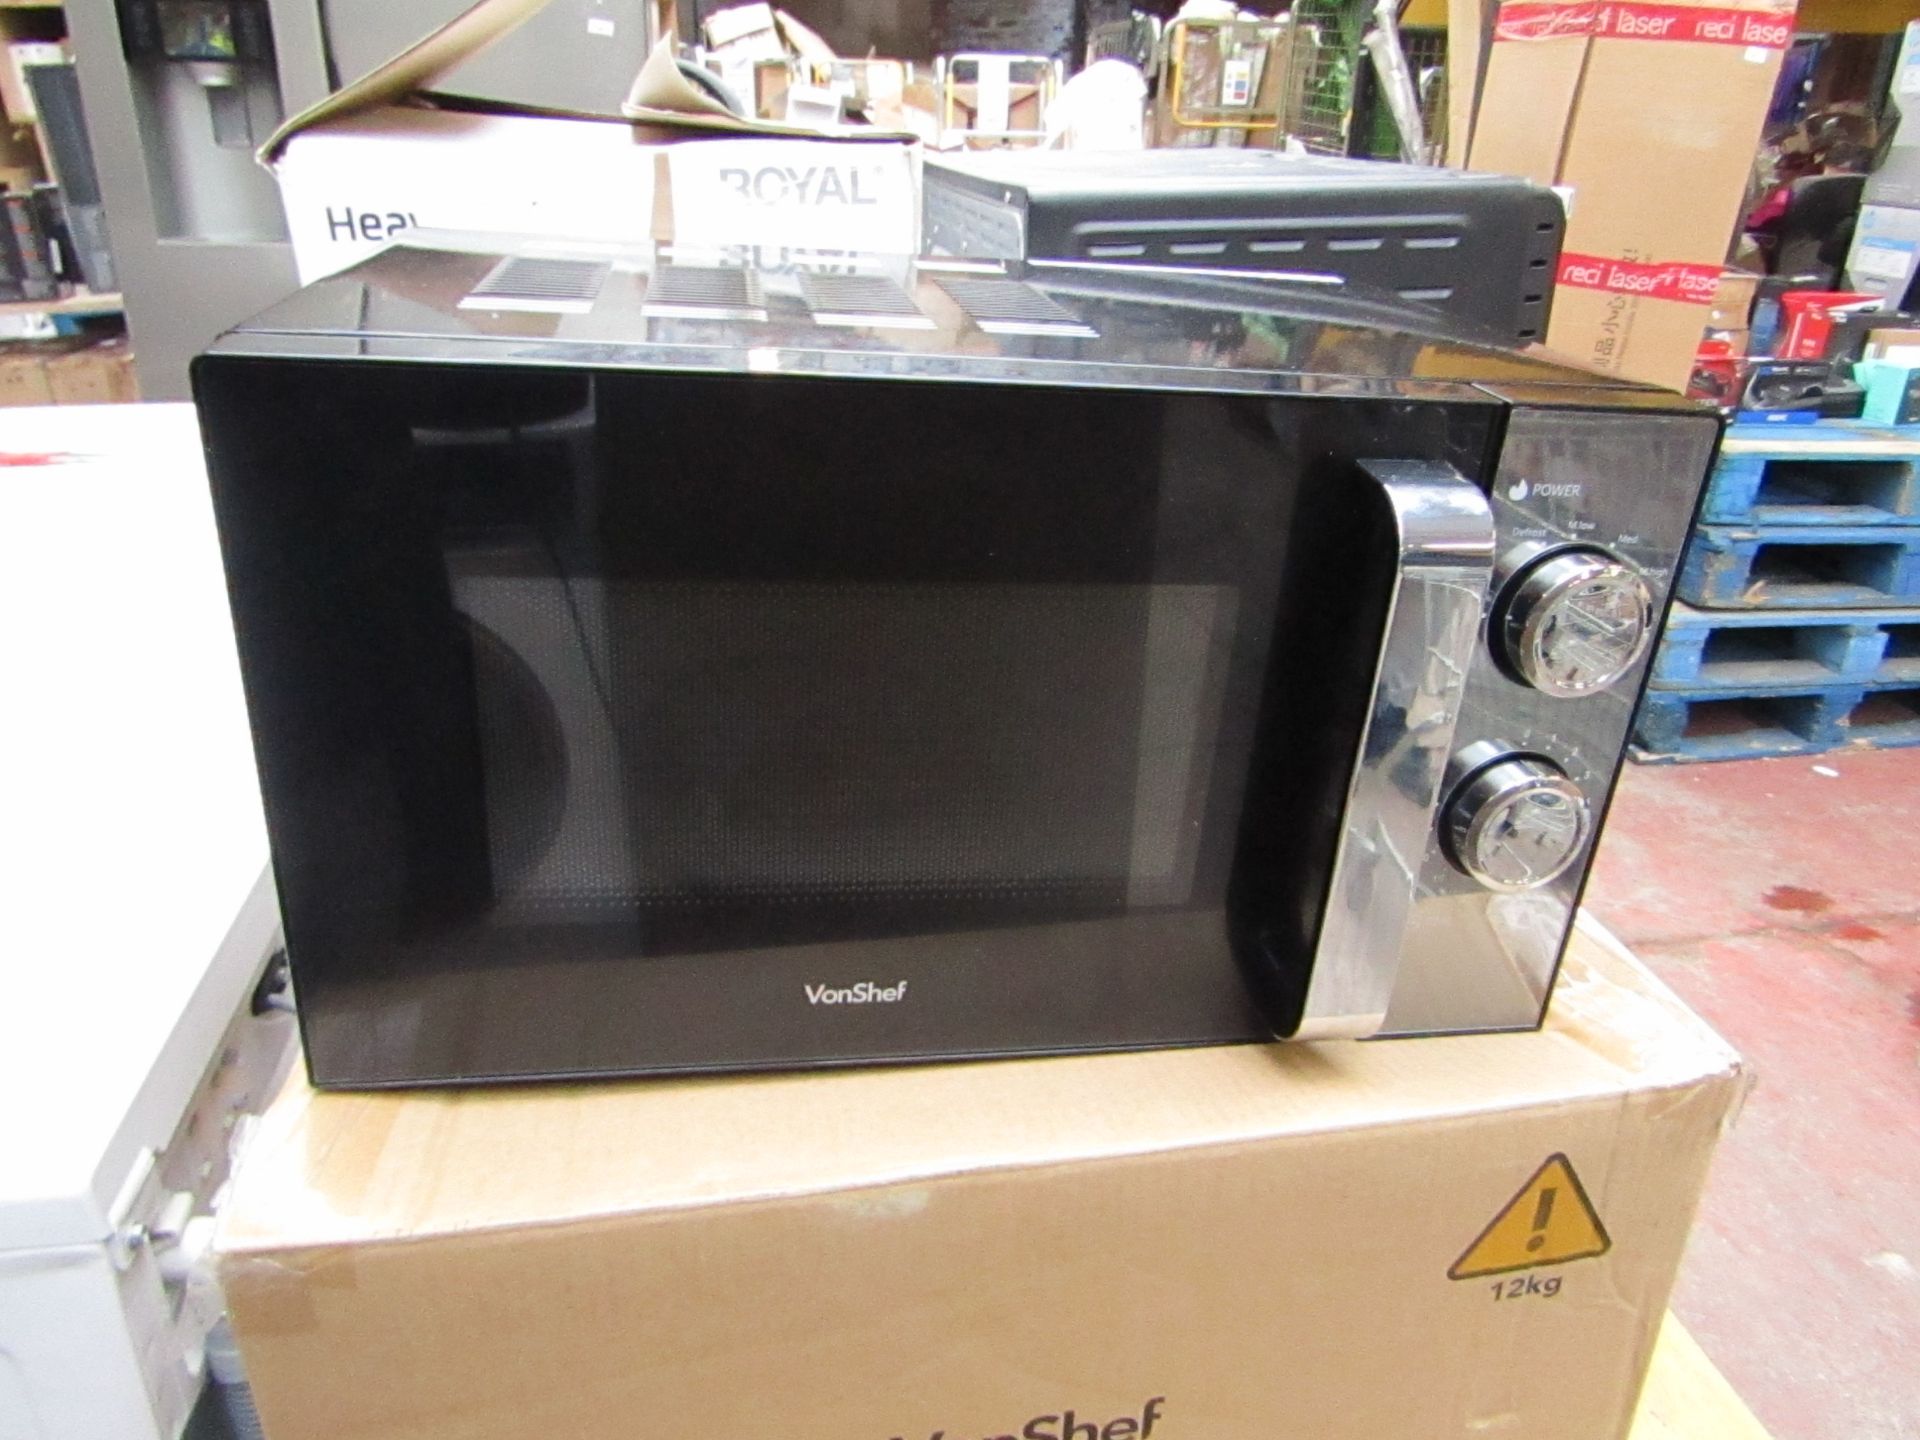 VonShef - 700W 23L Digital Microwave, untested and boxed.